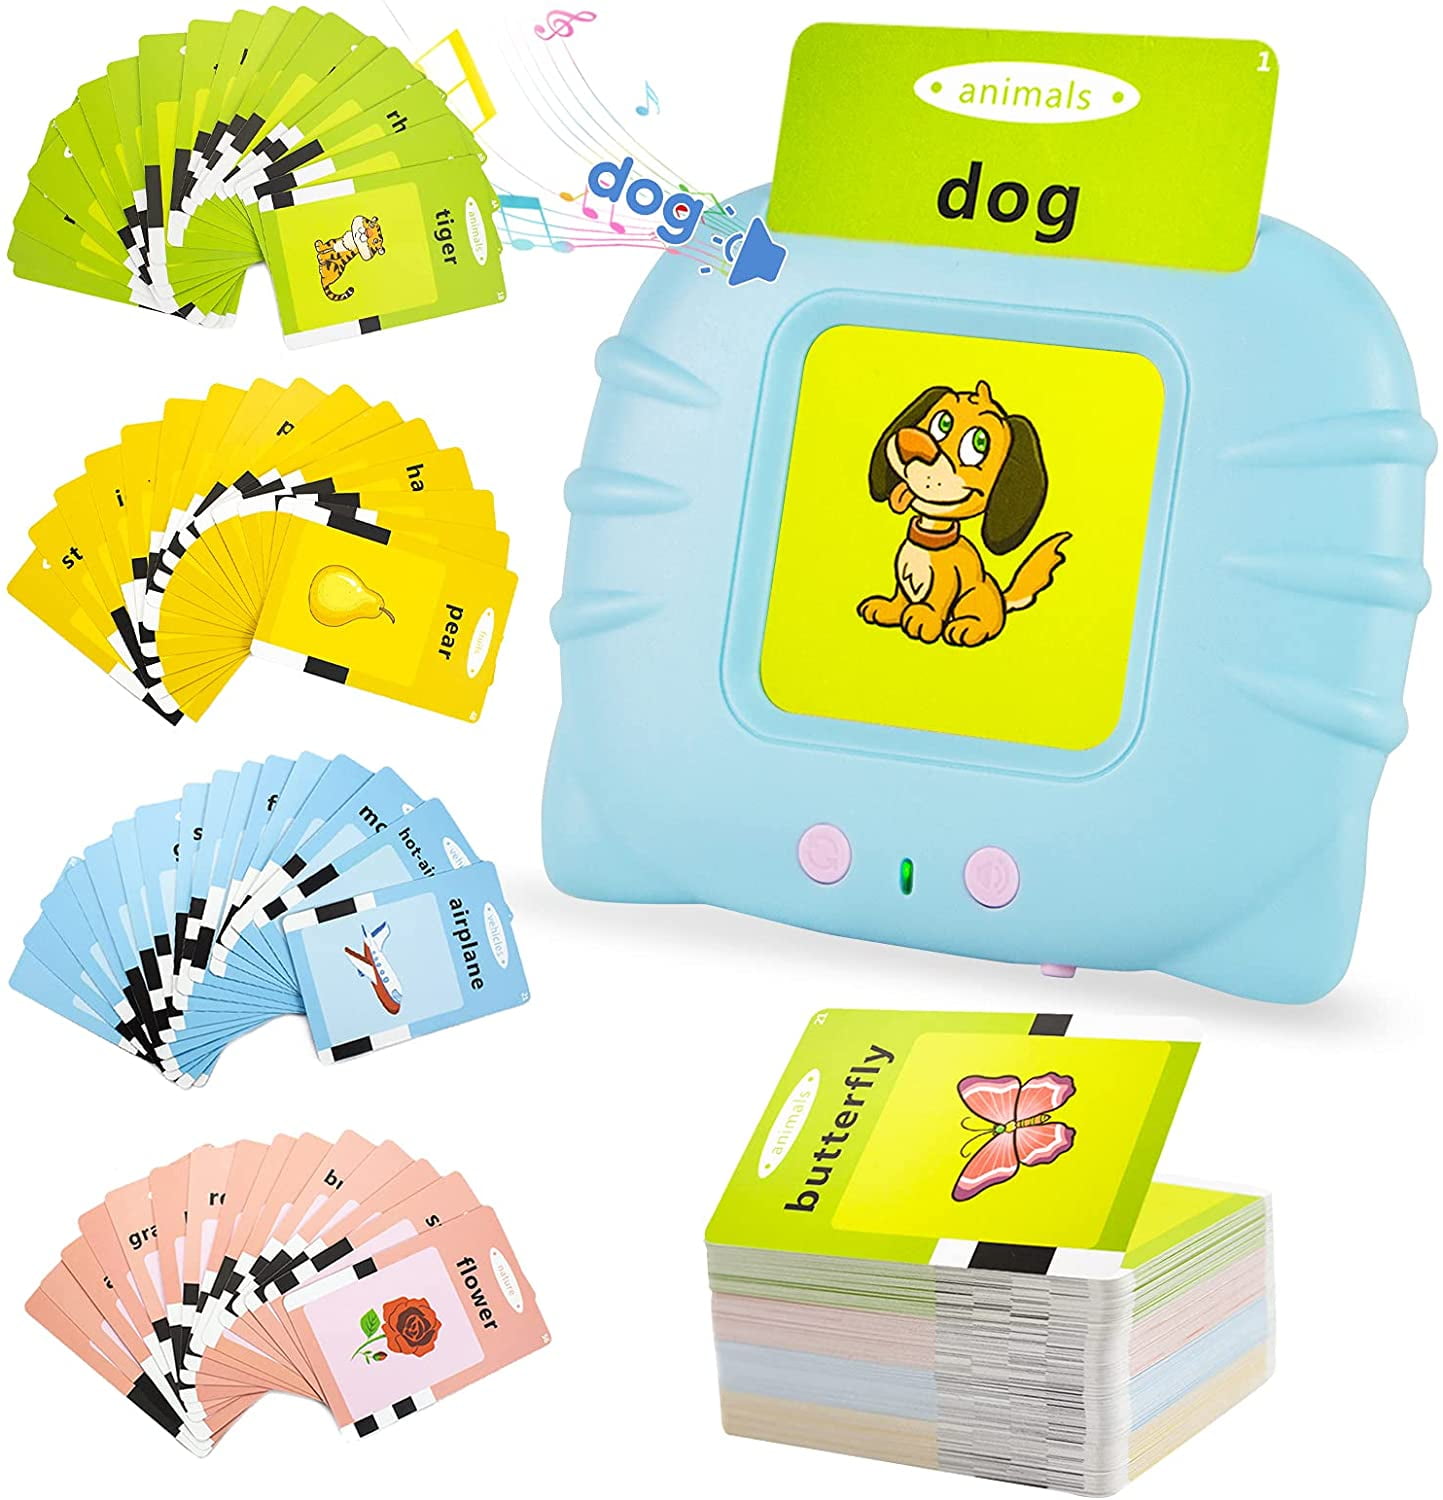 Details about   Water Magic Drawing Alphabet Flash Cards Educational Toy Gift for Baby Kids 